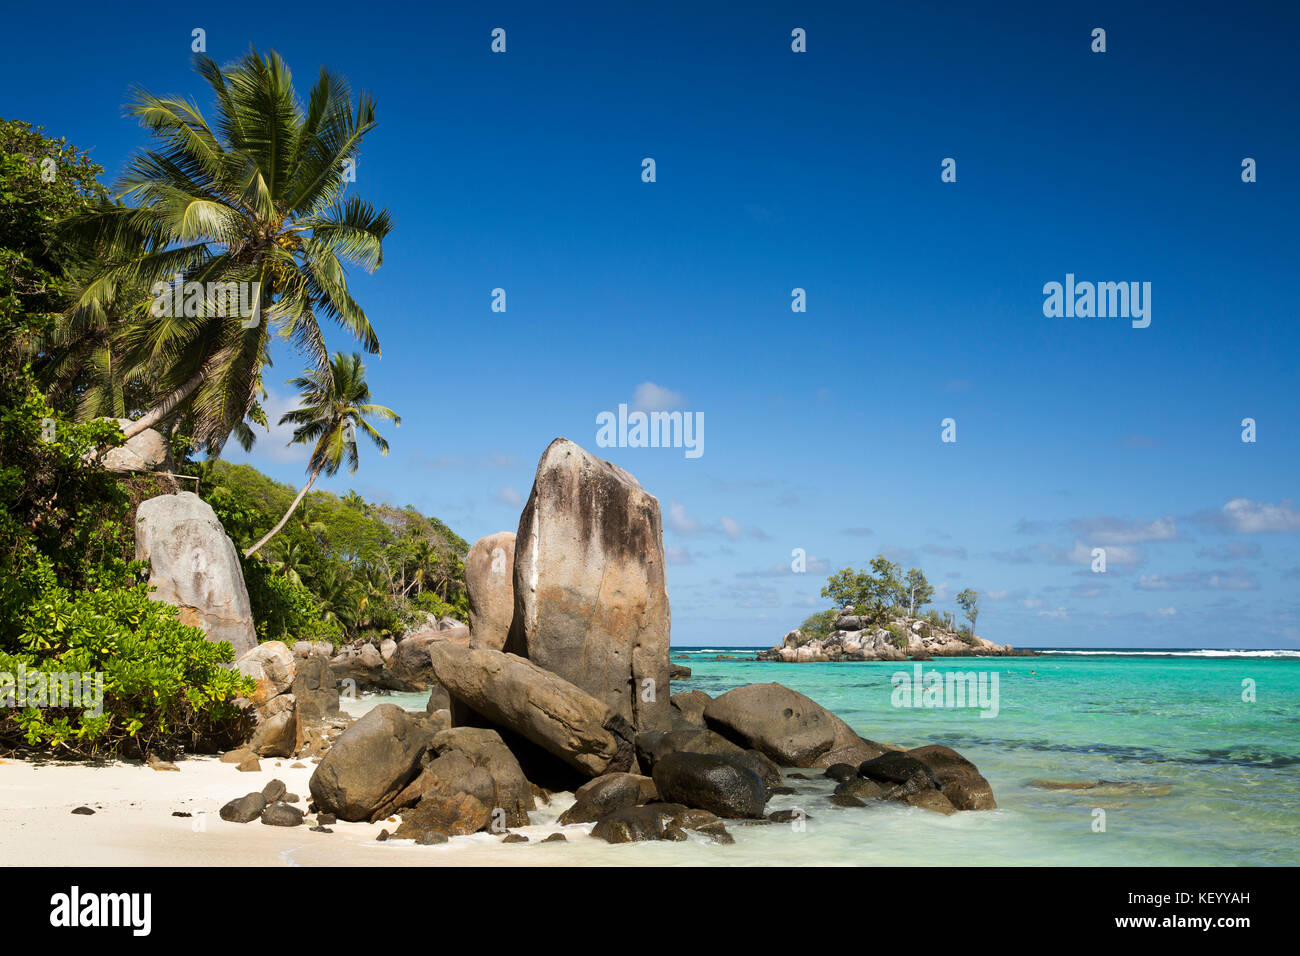 The Seychelles, Mahe, Anse Royale, Ile Souris, beach, granite rock formation sculpted by the sea Stock Photo